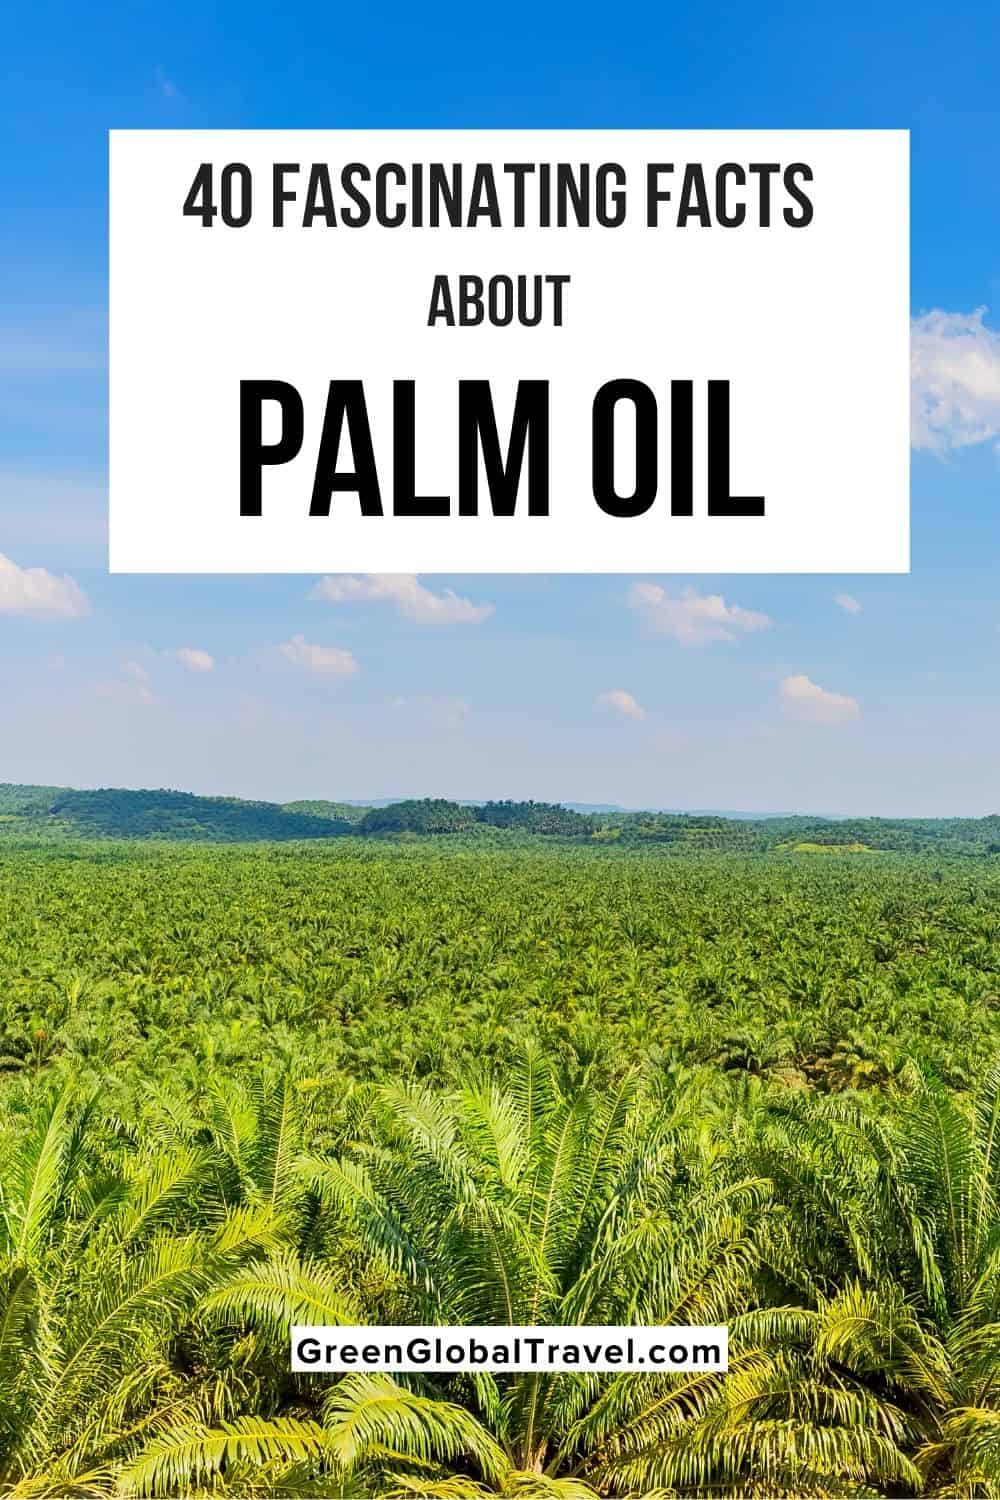 40 Fascinating Facts about Palm Oil including Deforestation for Palm Oil, Palm Oil & Orangutans, Facts About Sustainable Palm Oil, Palm Oil Products List and more!